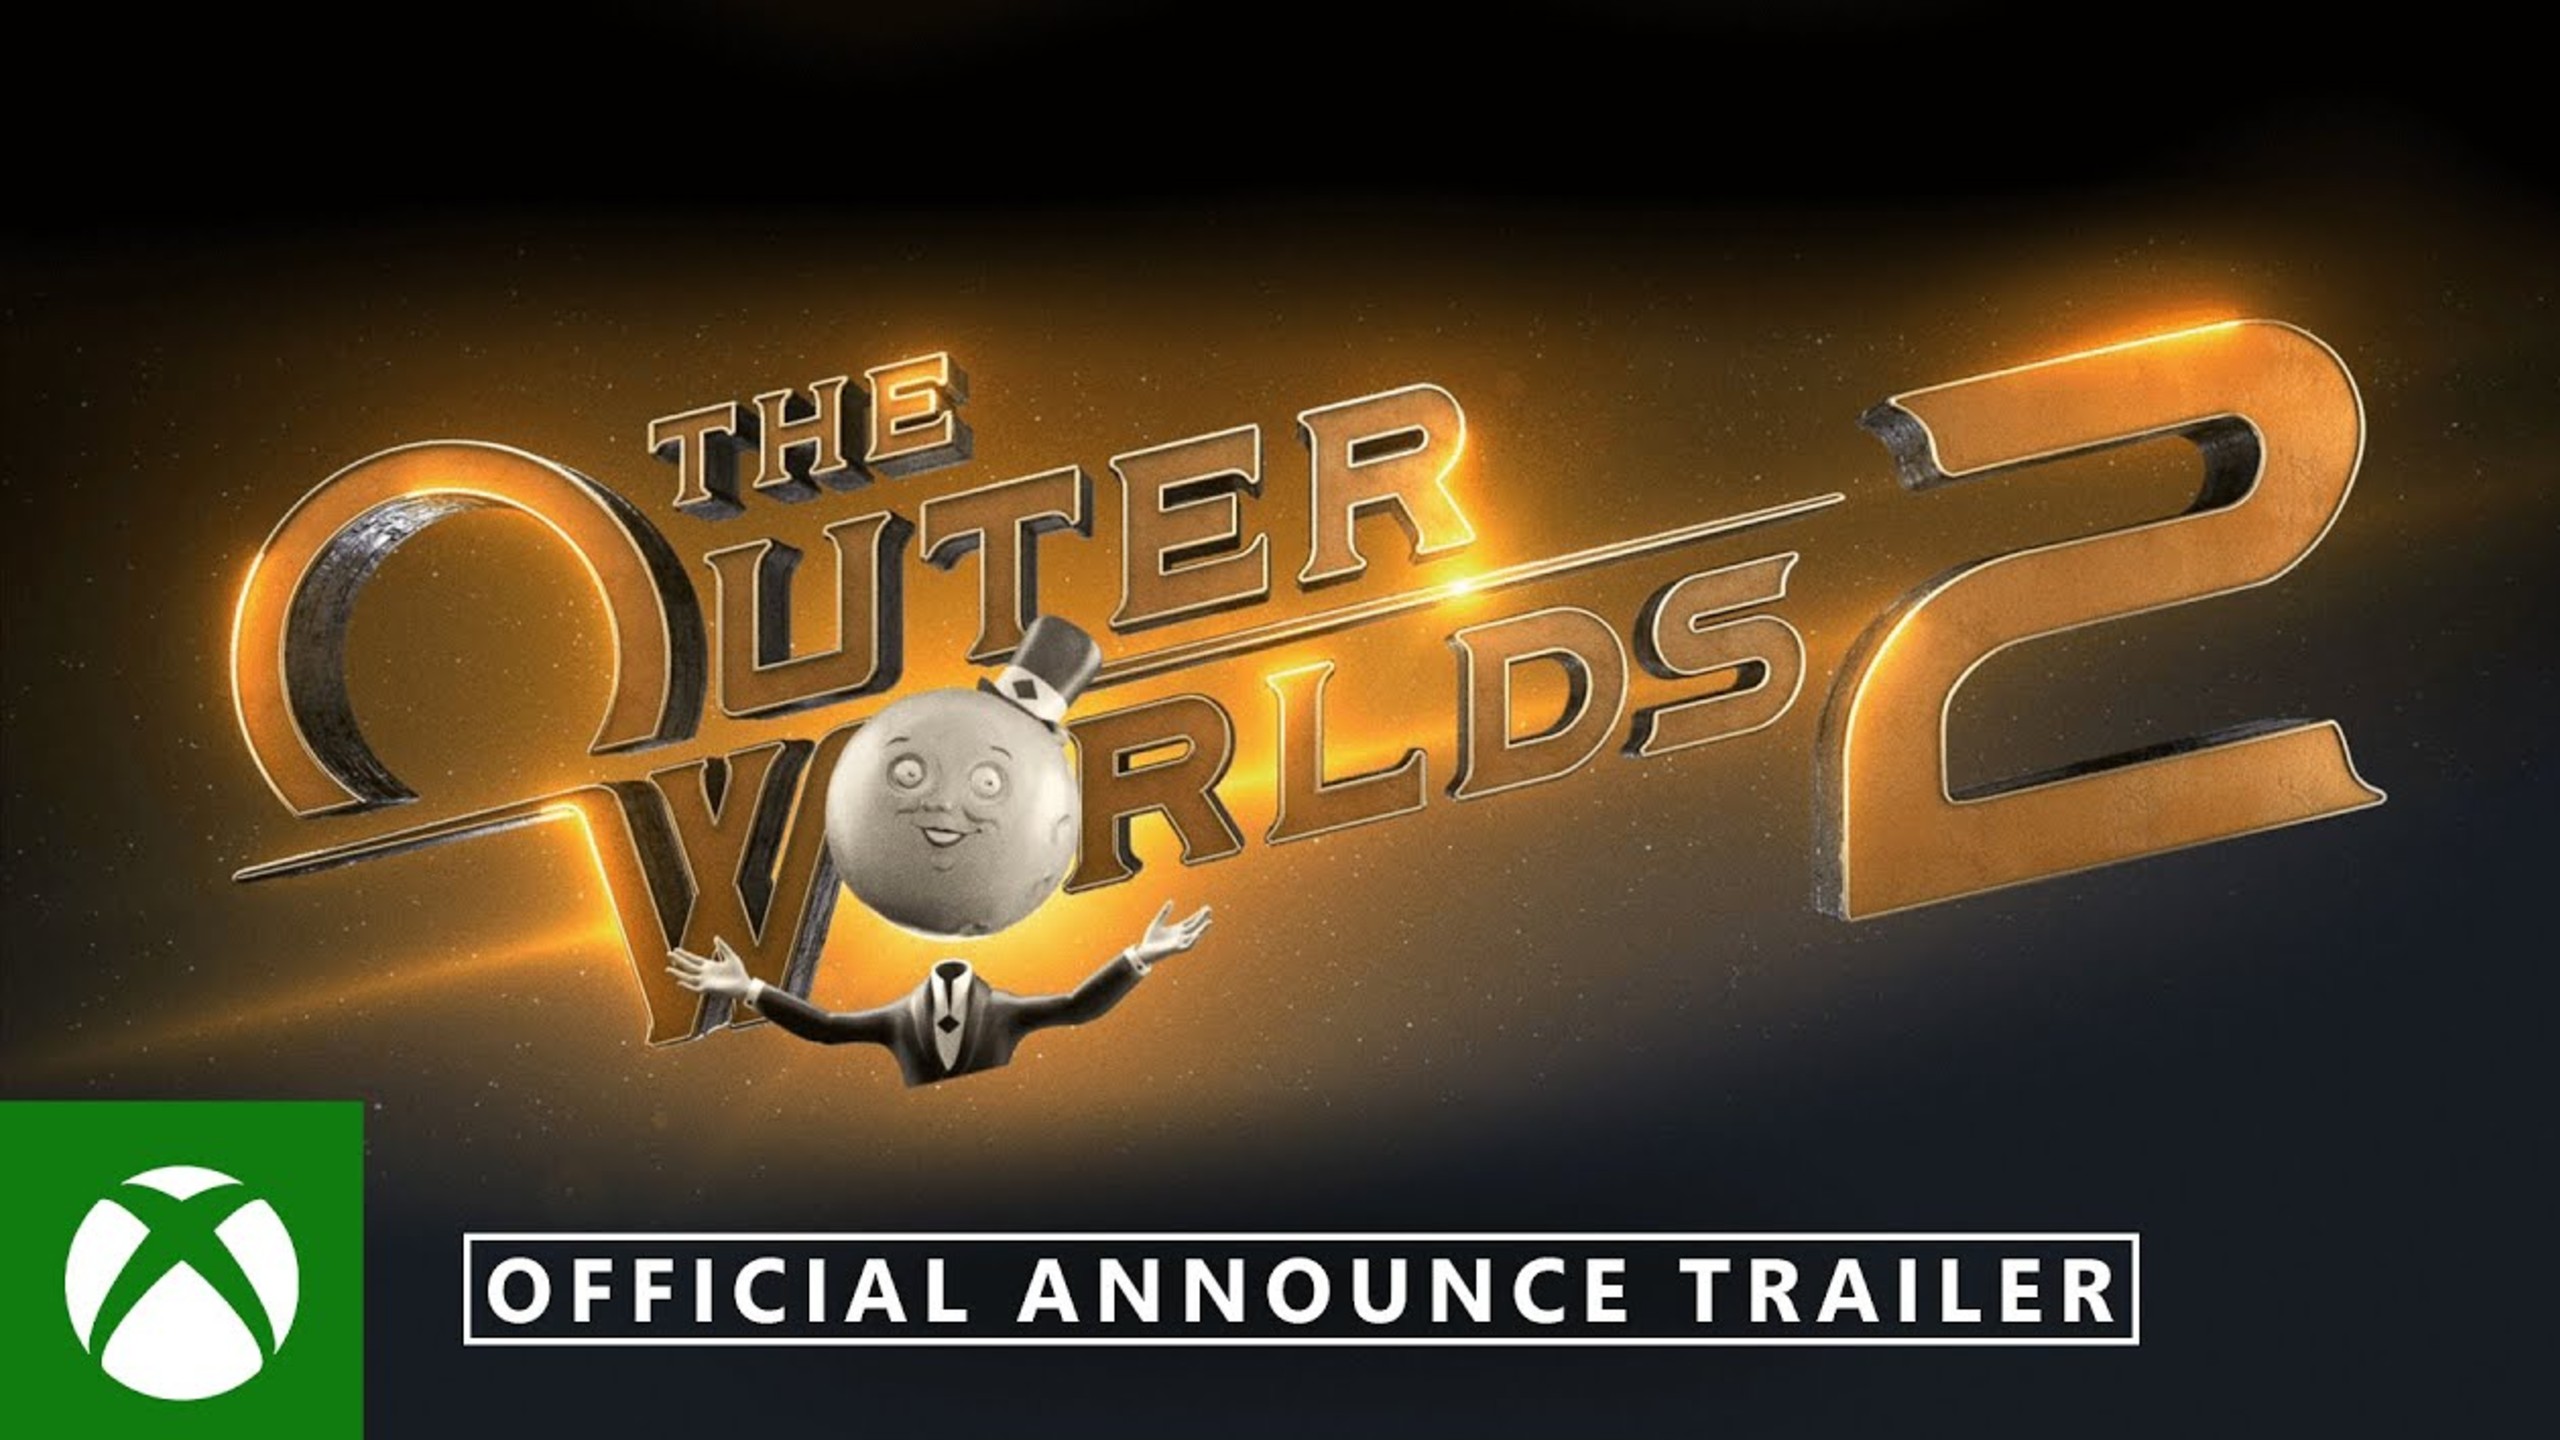 The Outer Worlds 2 Announce Trailer